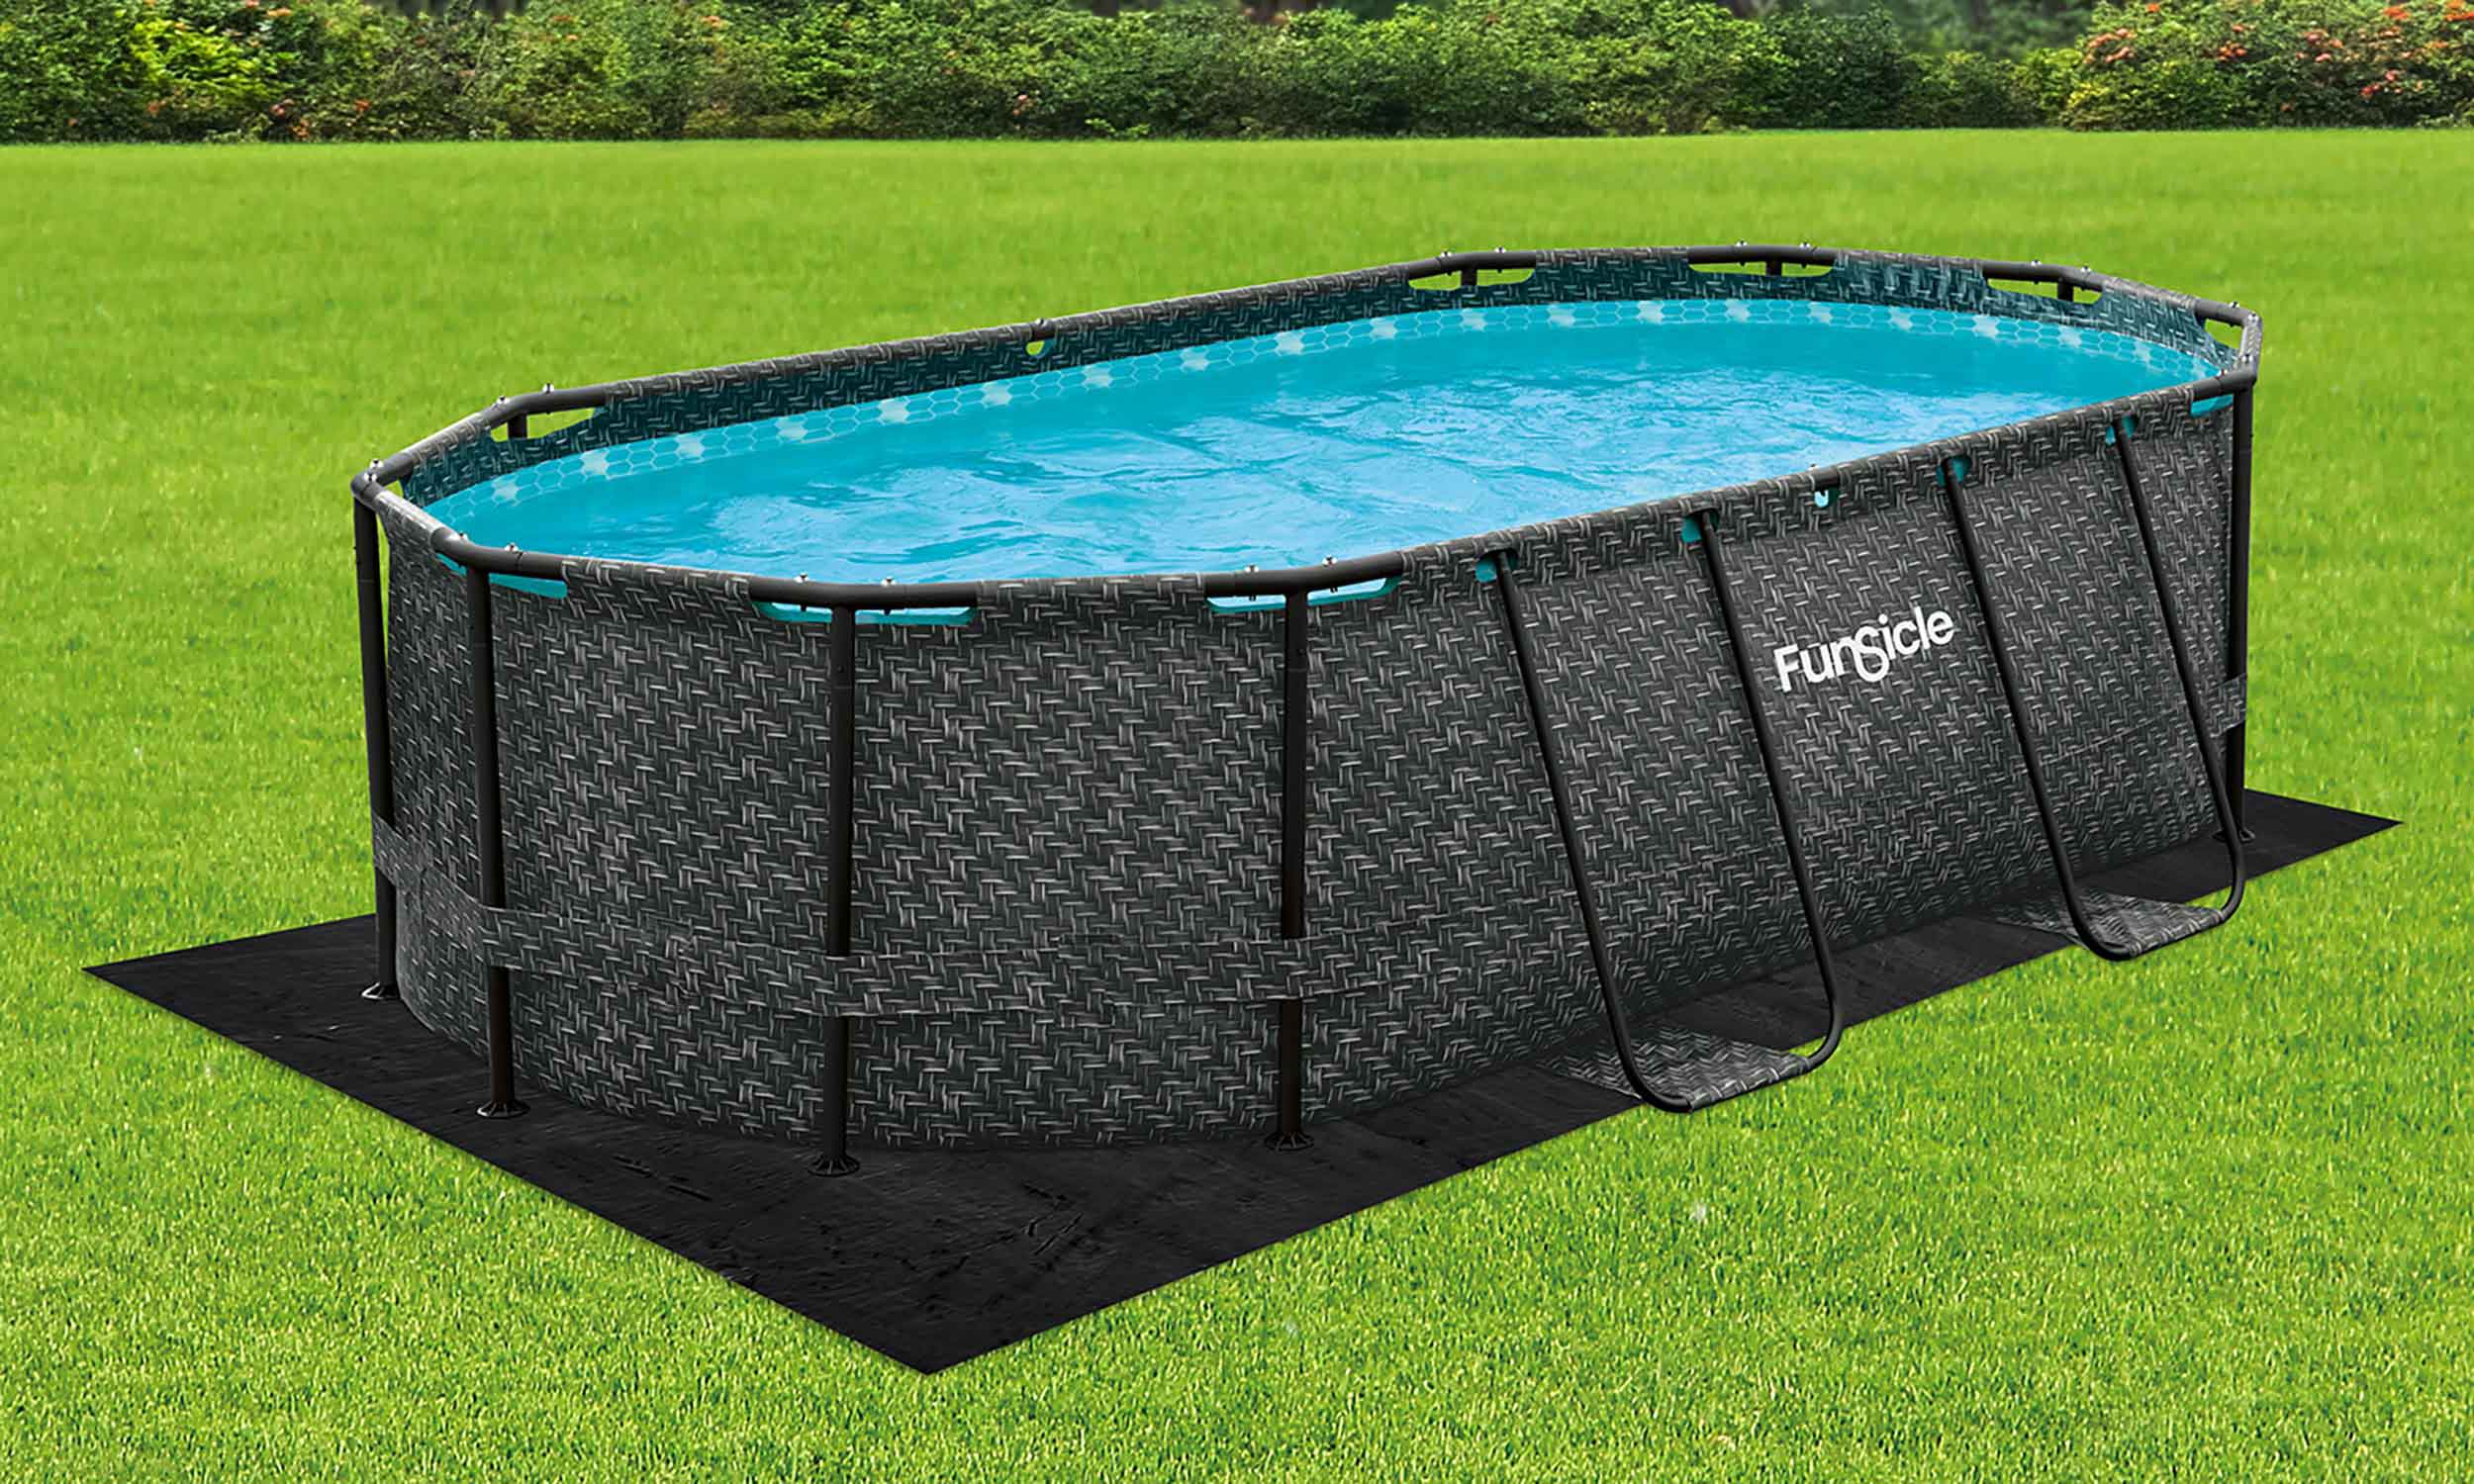 Funsicle 18.8ft Rectangular Ground Cloth with pool on a grass background